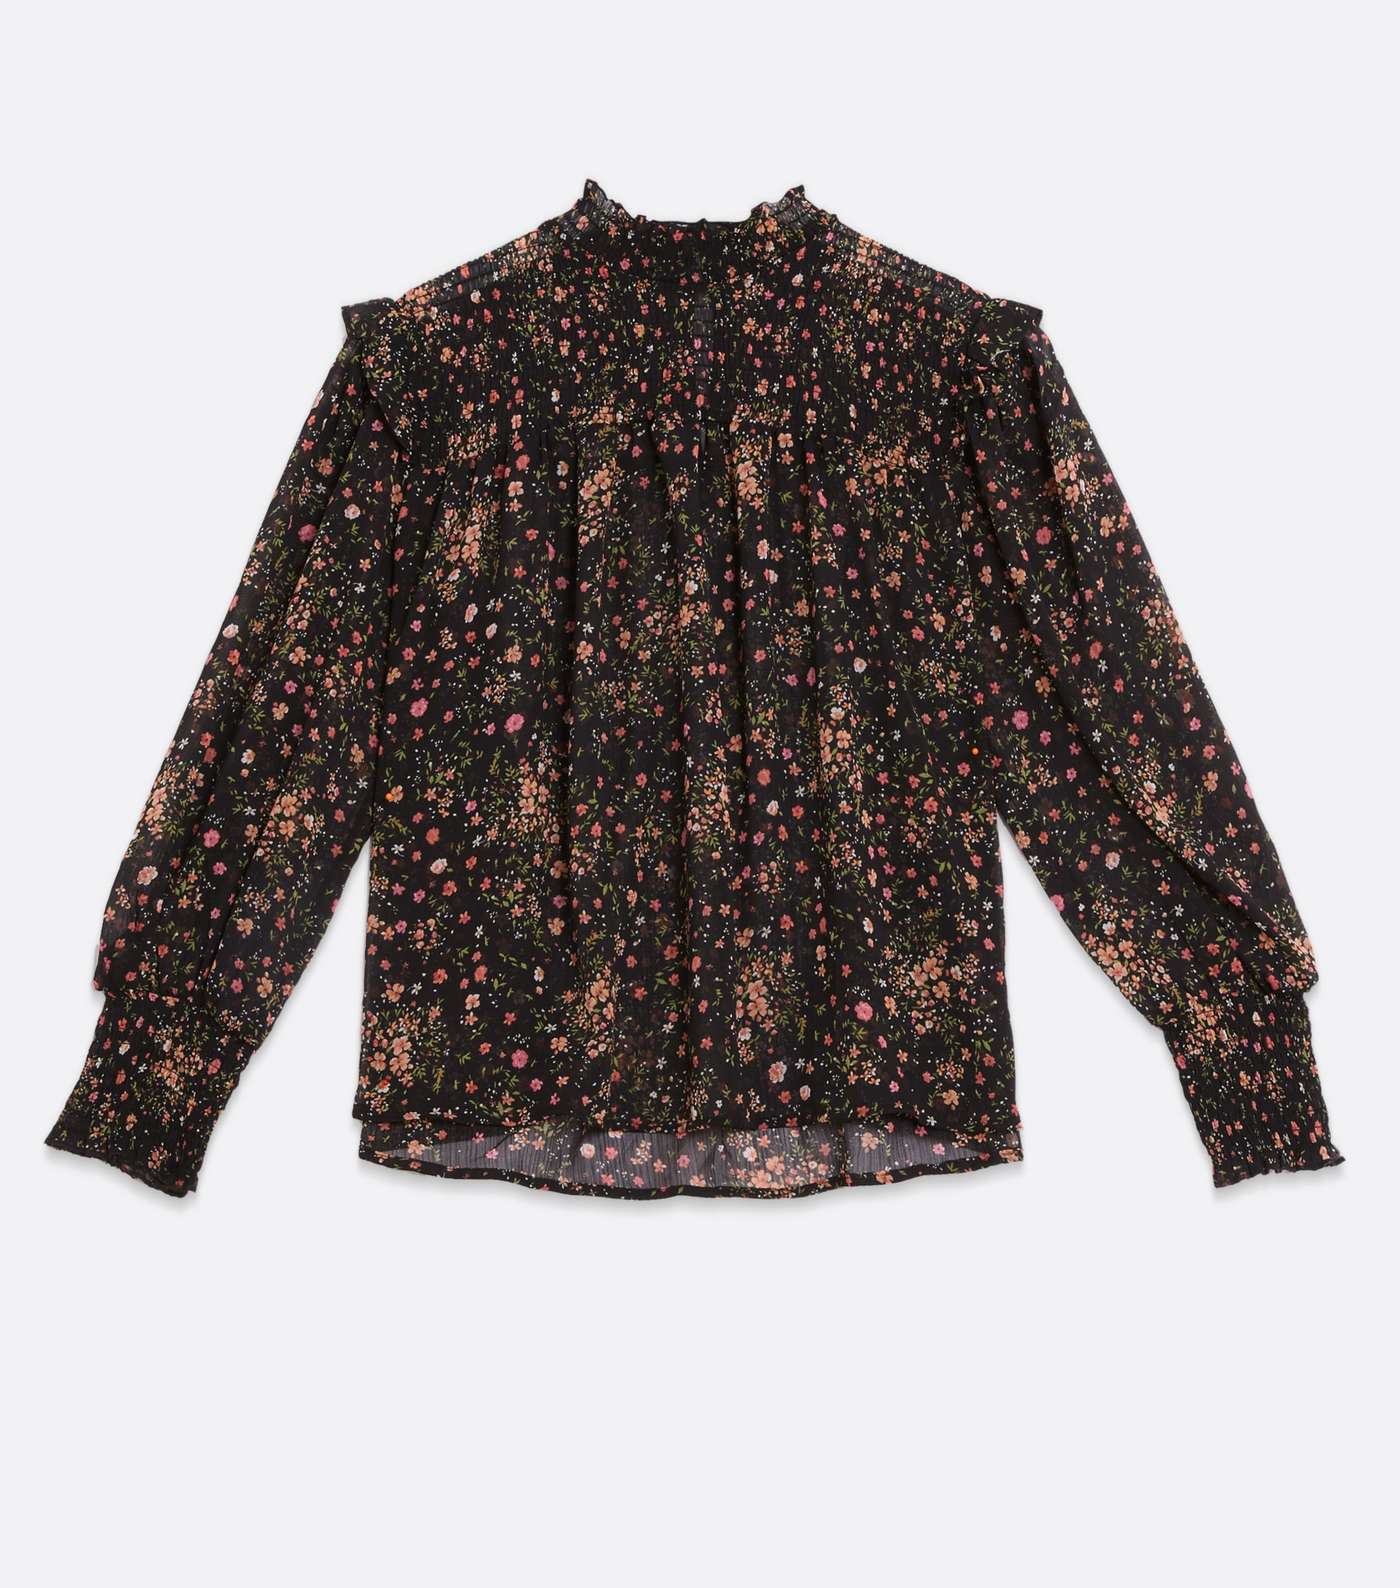 Petite Black Ditsy Floral Chiffon High Neck Puff Sleeve Blouse Image 5